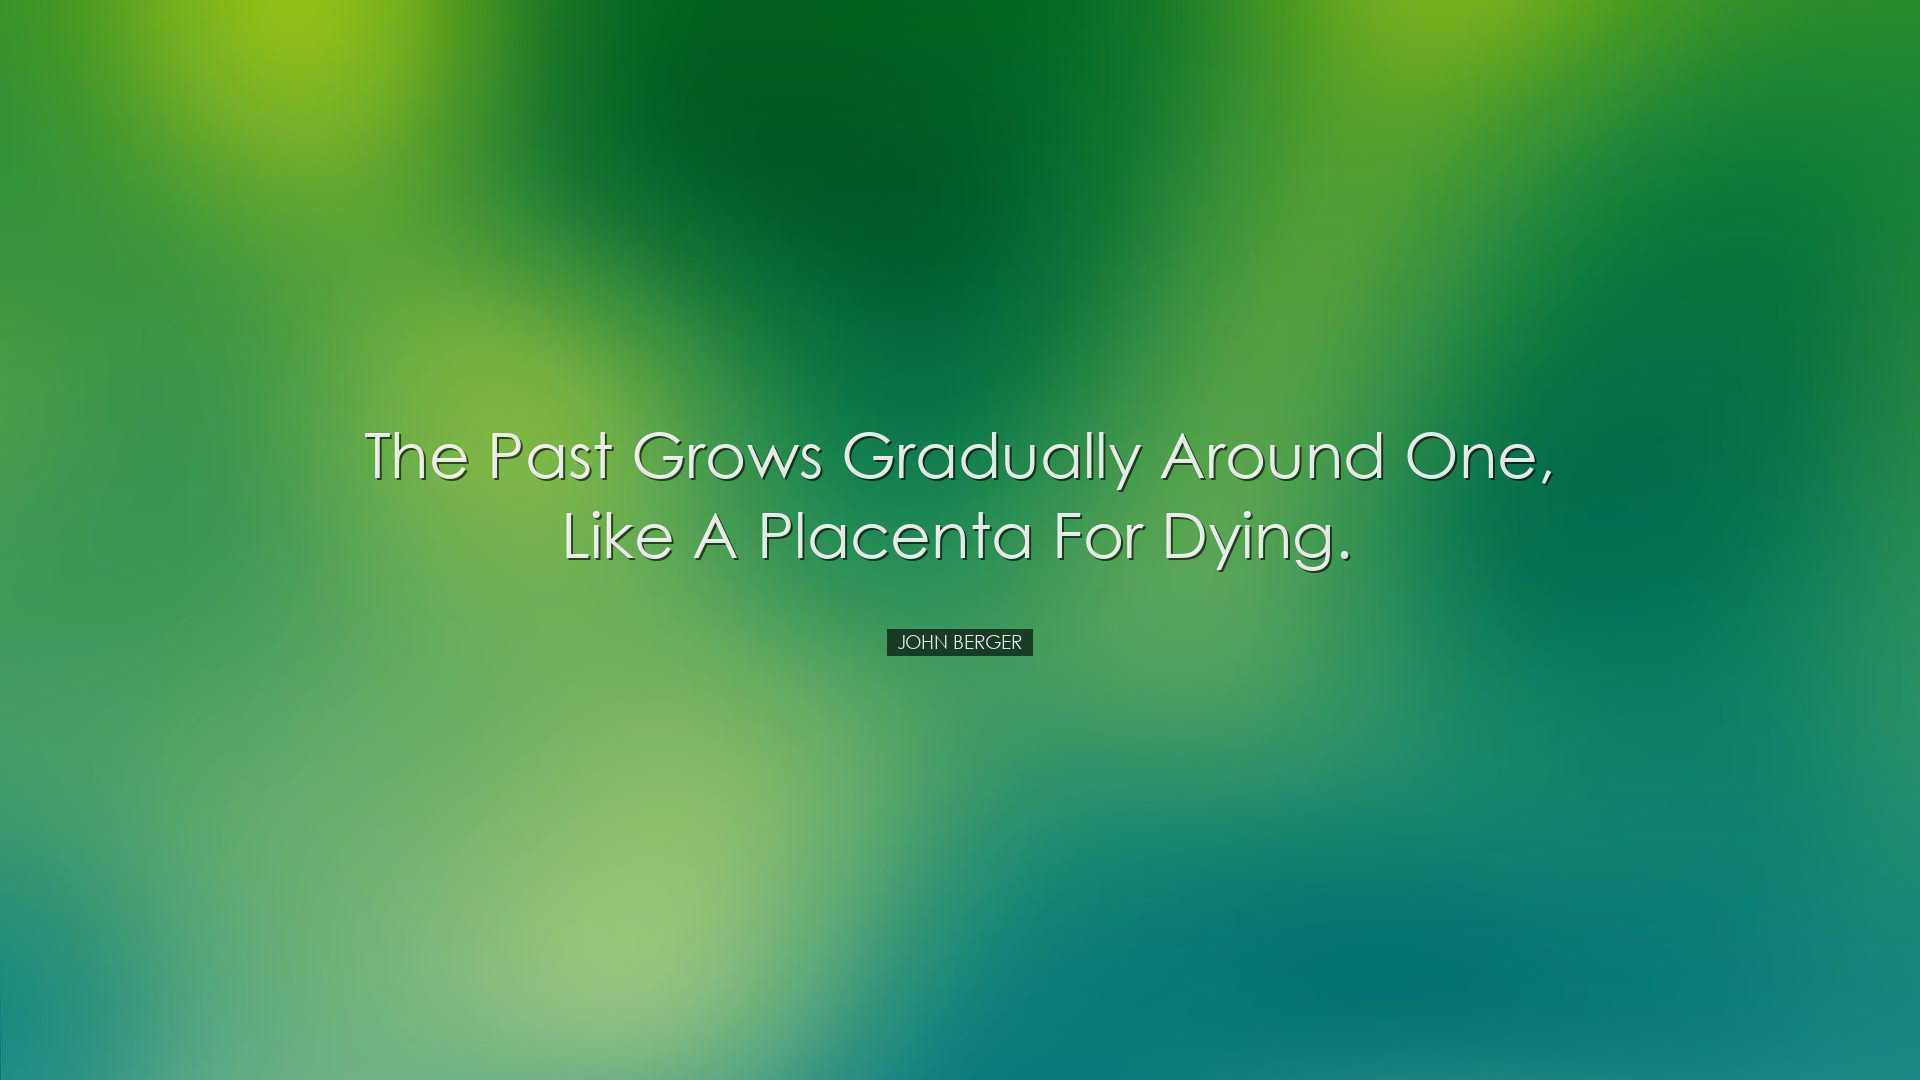 The past grows gradually around one, like a placenta for dying. -